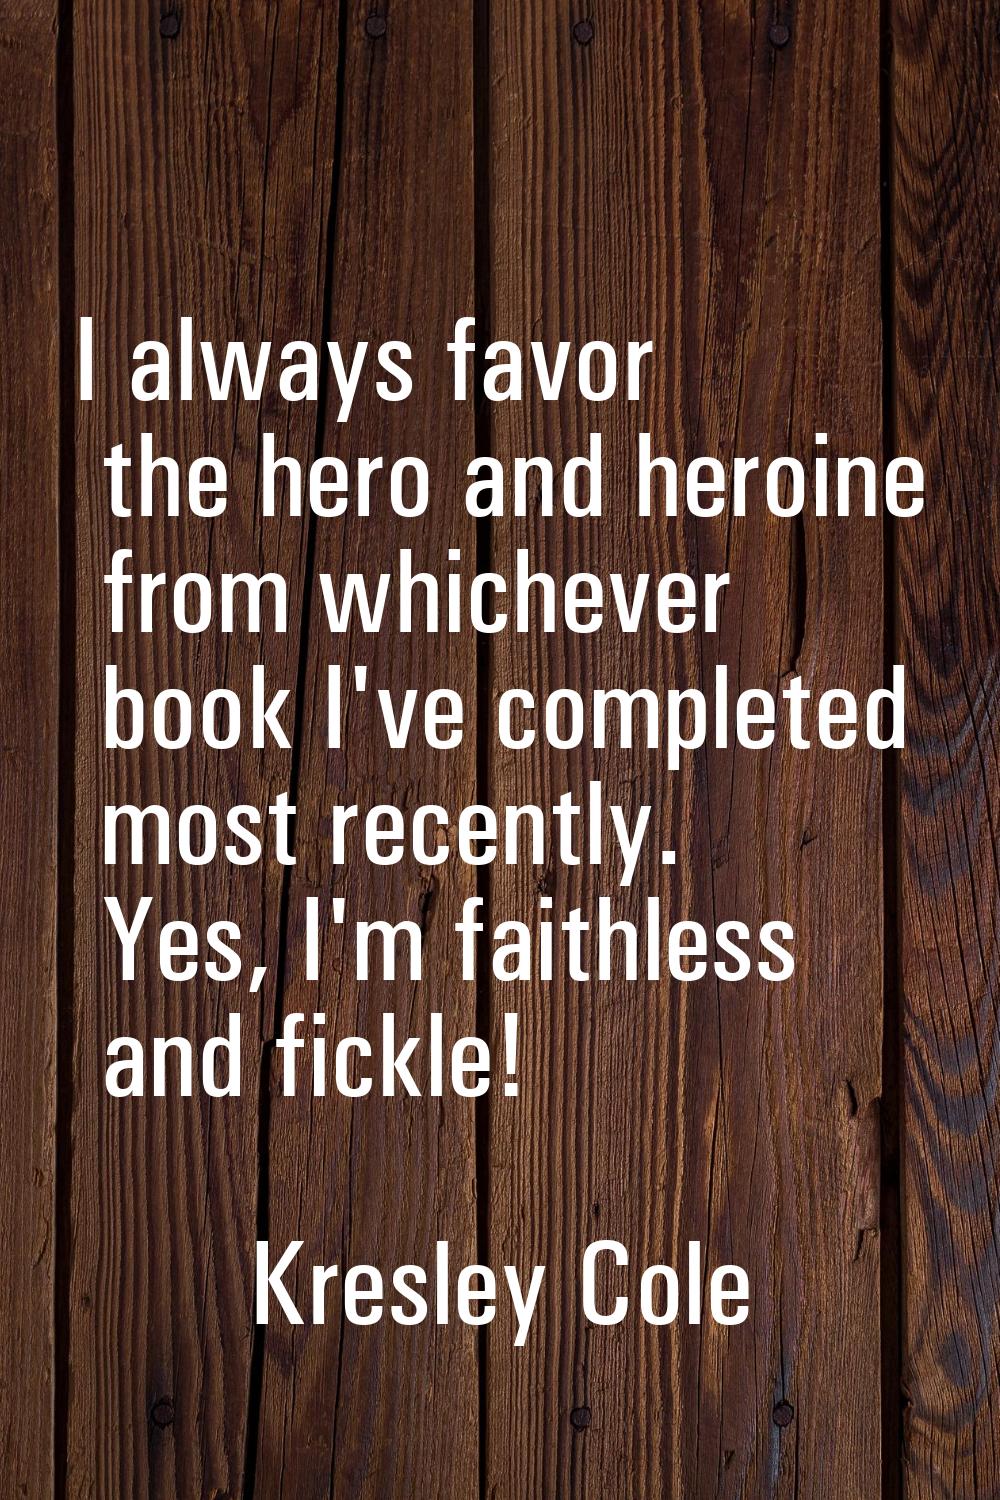 I always favor the hero and heroine from whichever book I've completed most recently. Yes, I'm fait